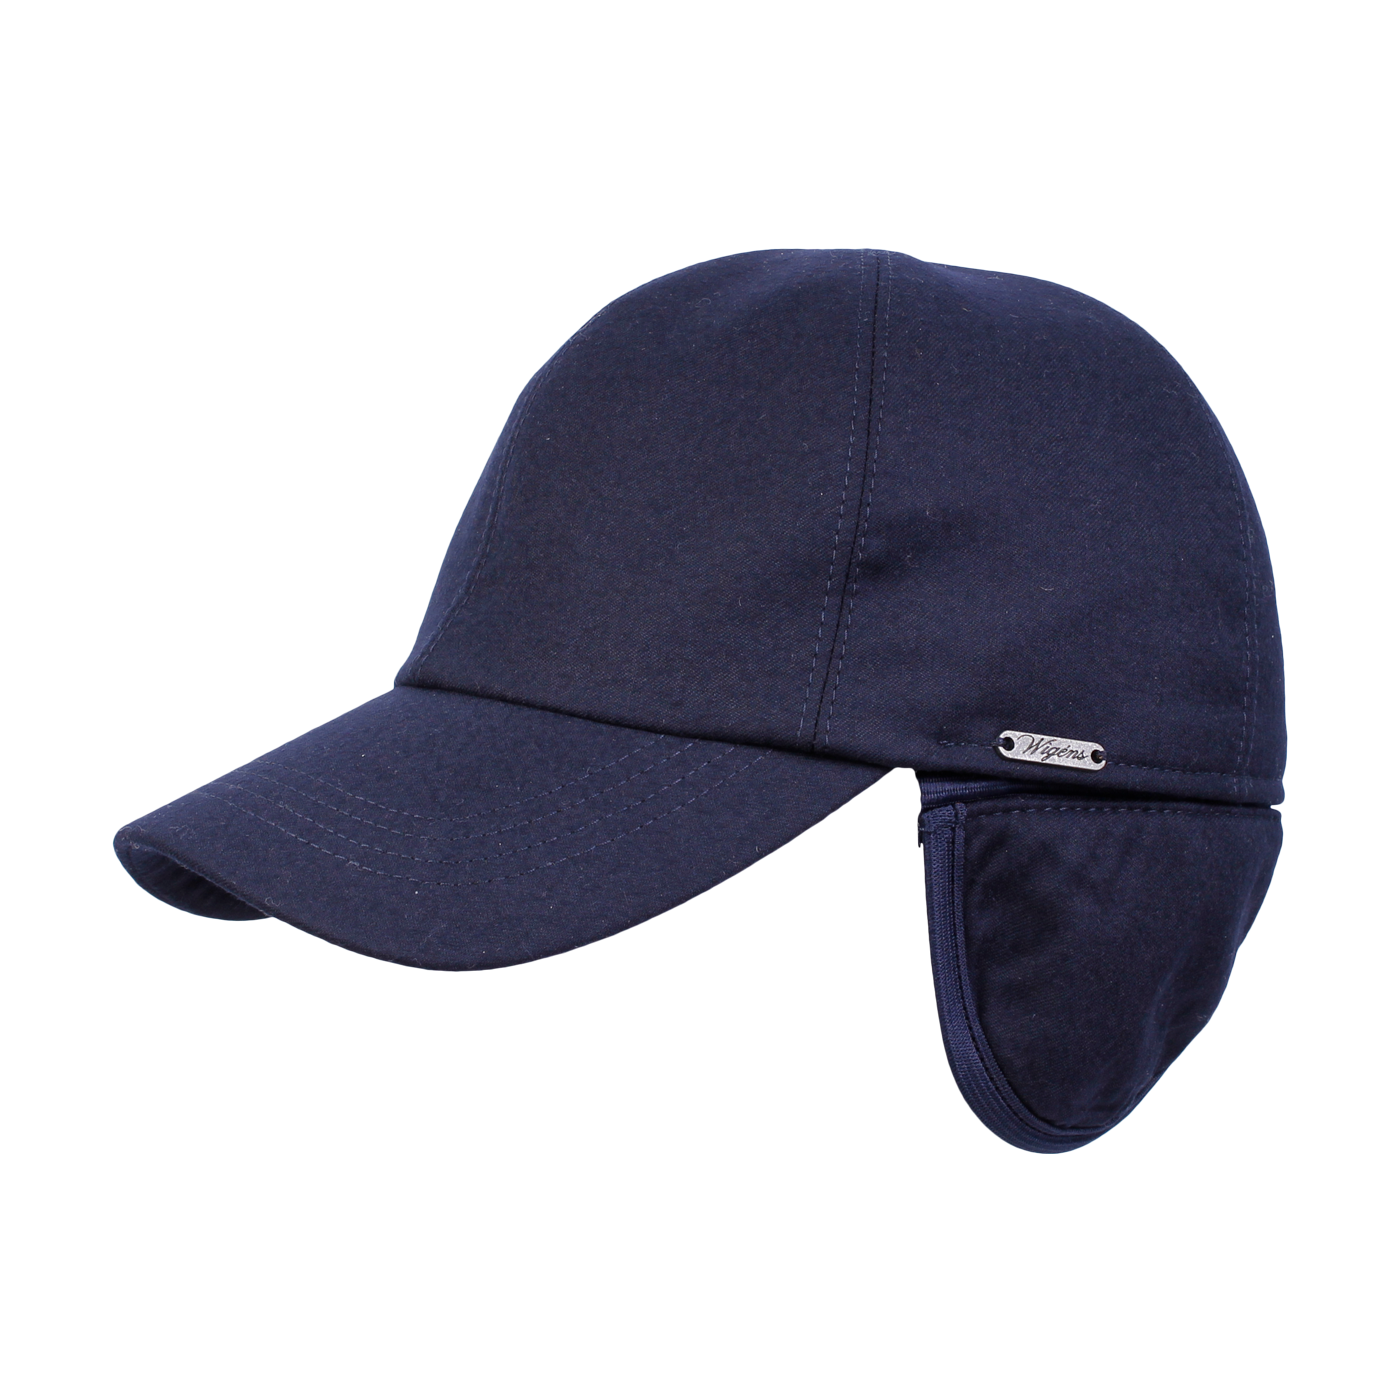 Light Wool Flannel Baseball Classic Cap with Earflaps (Choice of Colors) by Wigens